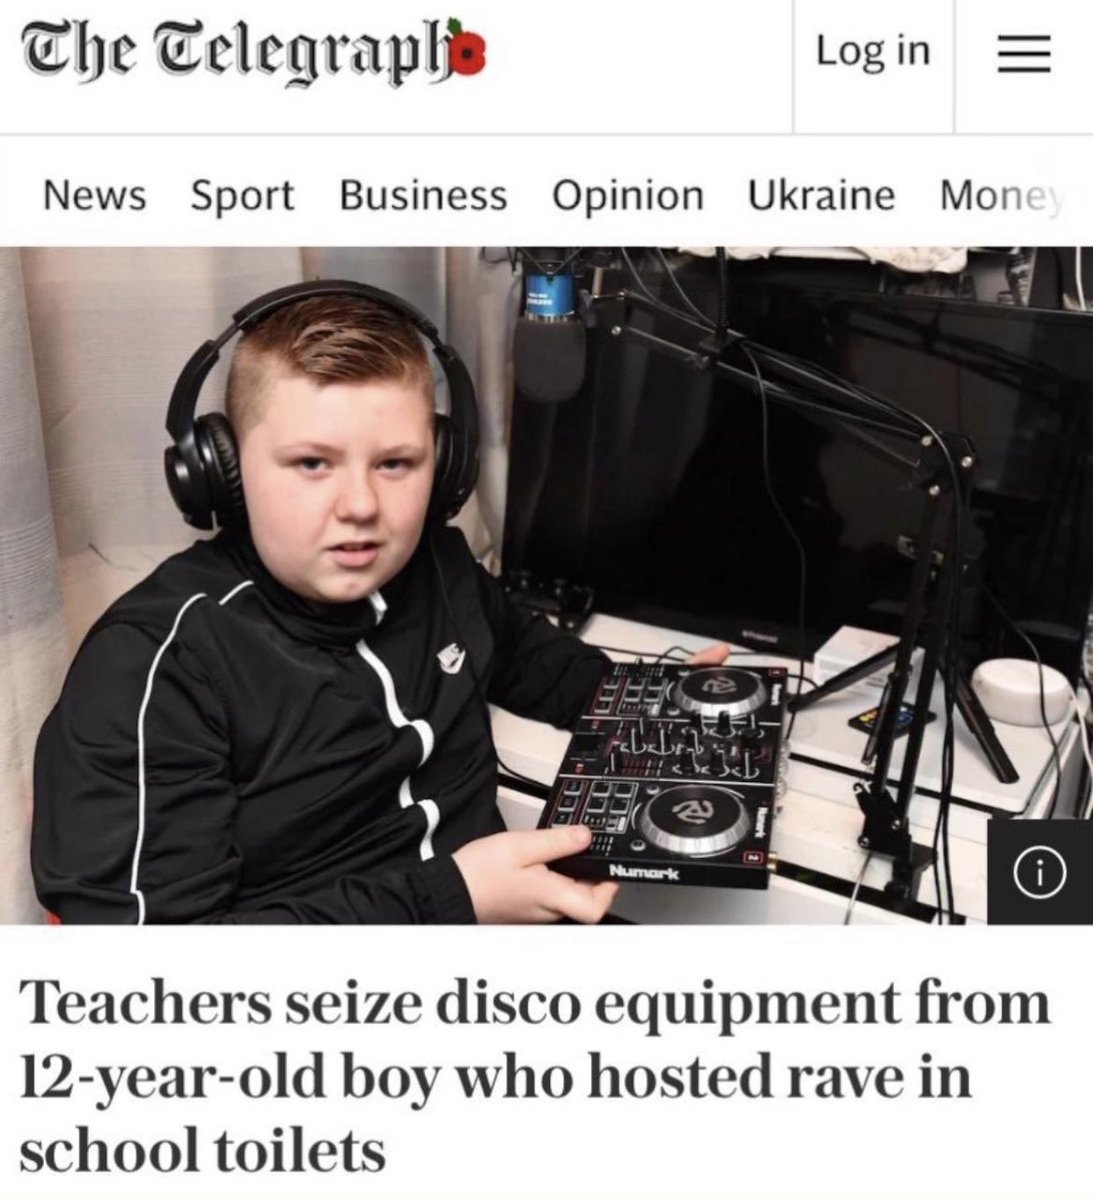 dudes posting their w's - kid throws rave in bathroom - The Telegraph News Sport Business Opinion Ukraine Money int Tid Numark 15 Log in i Teachers seize disco equipment from 12yearold boy who hosted rave in school toilets